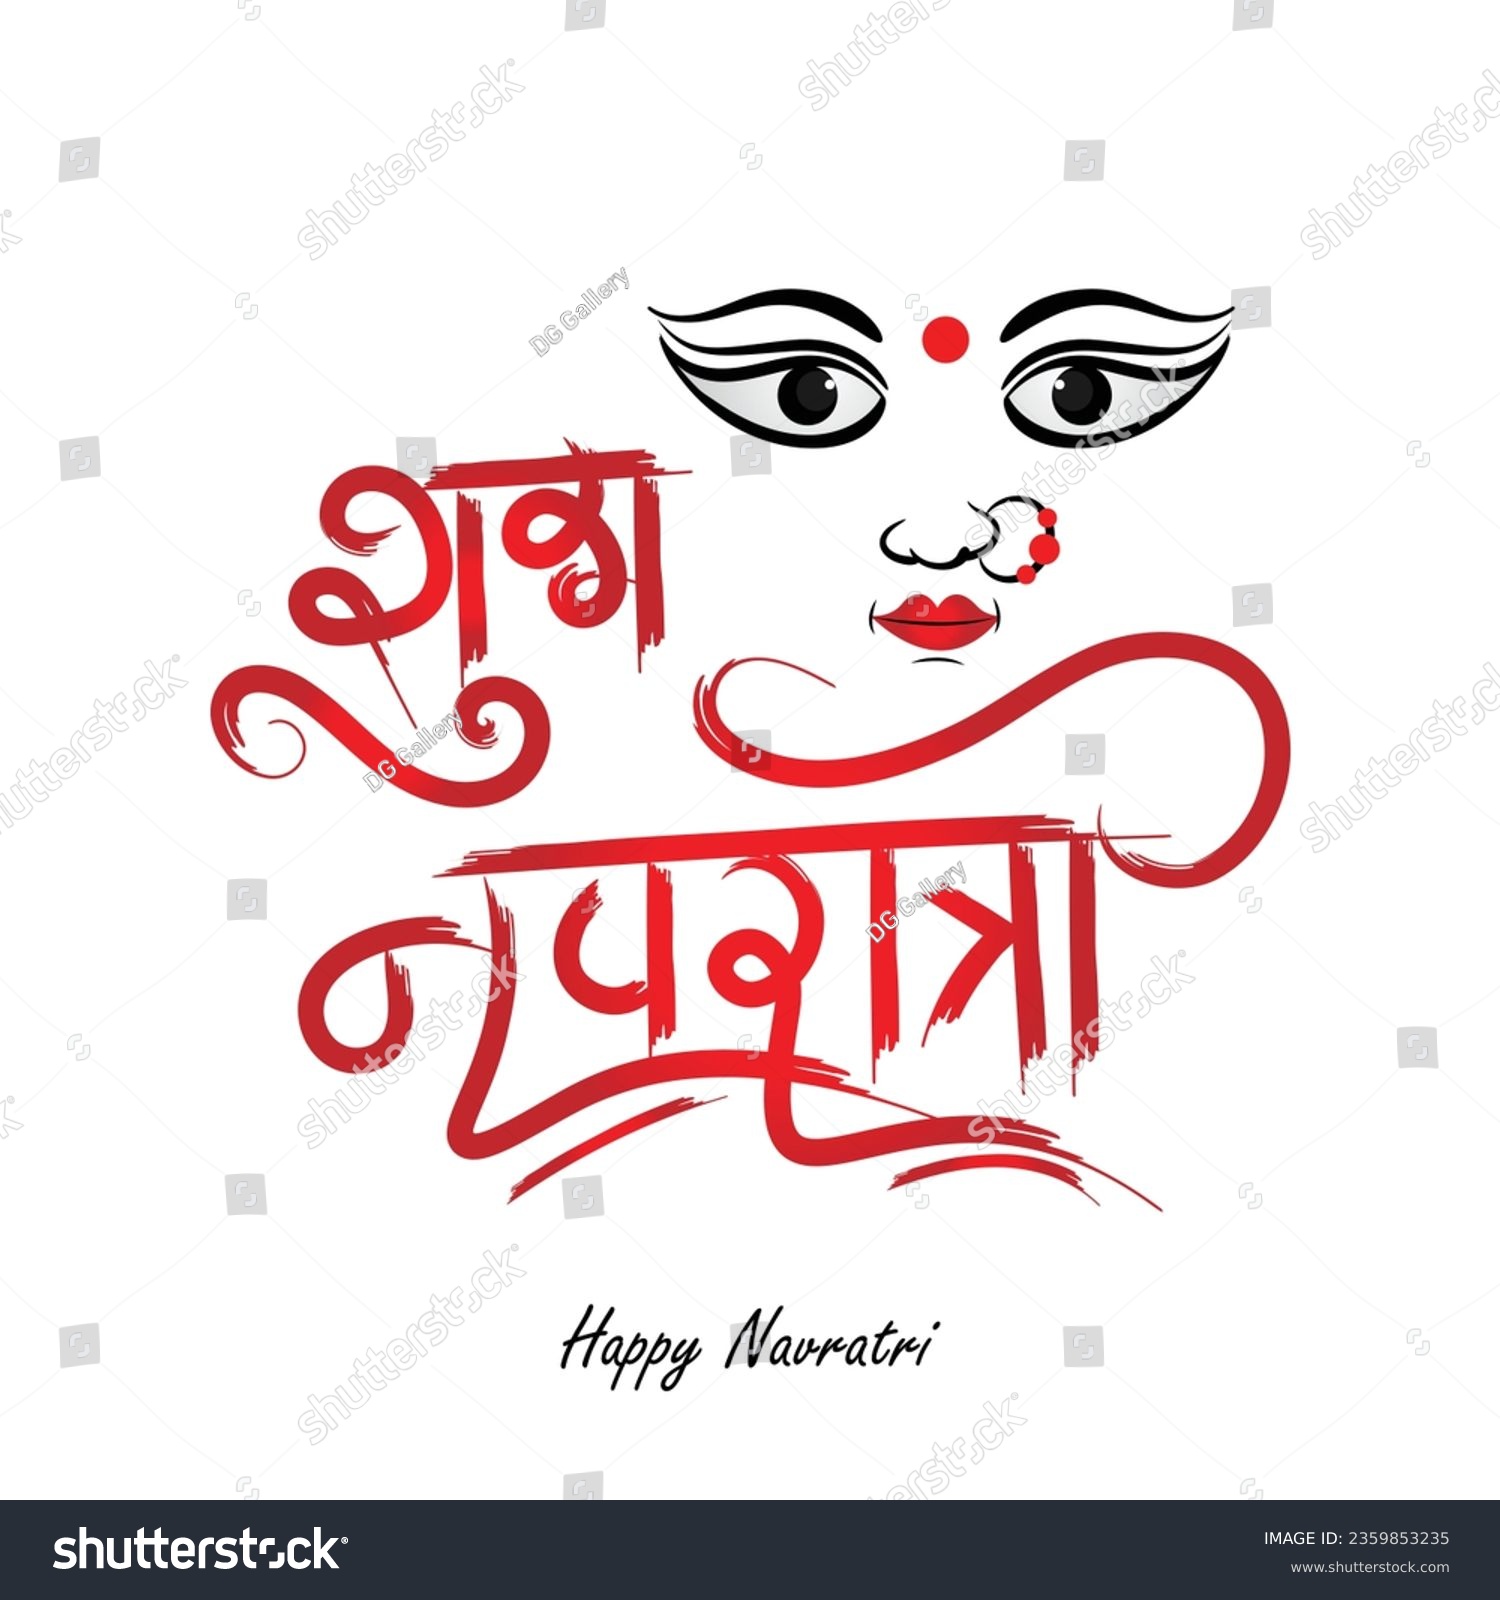 SVG of Happy Navratri Indian Festival goddess durga face illustration with Hindi Text of Shubh Navratri Means 'Nine Nights of Divinity' svg